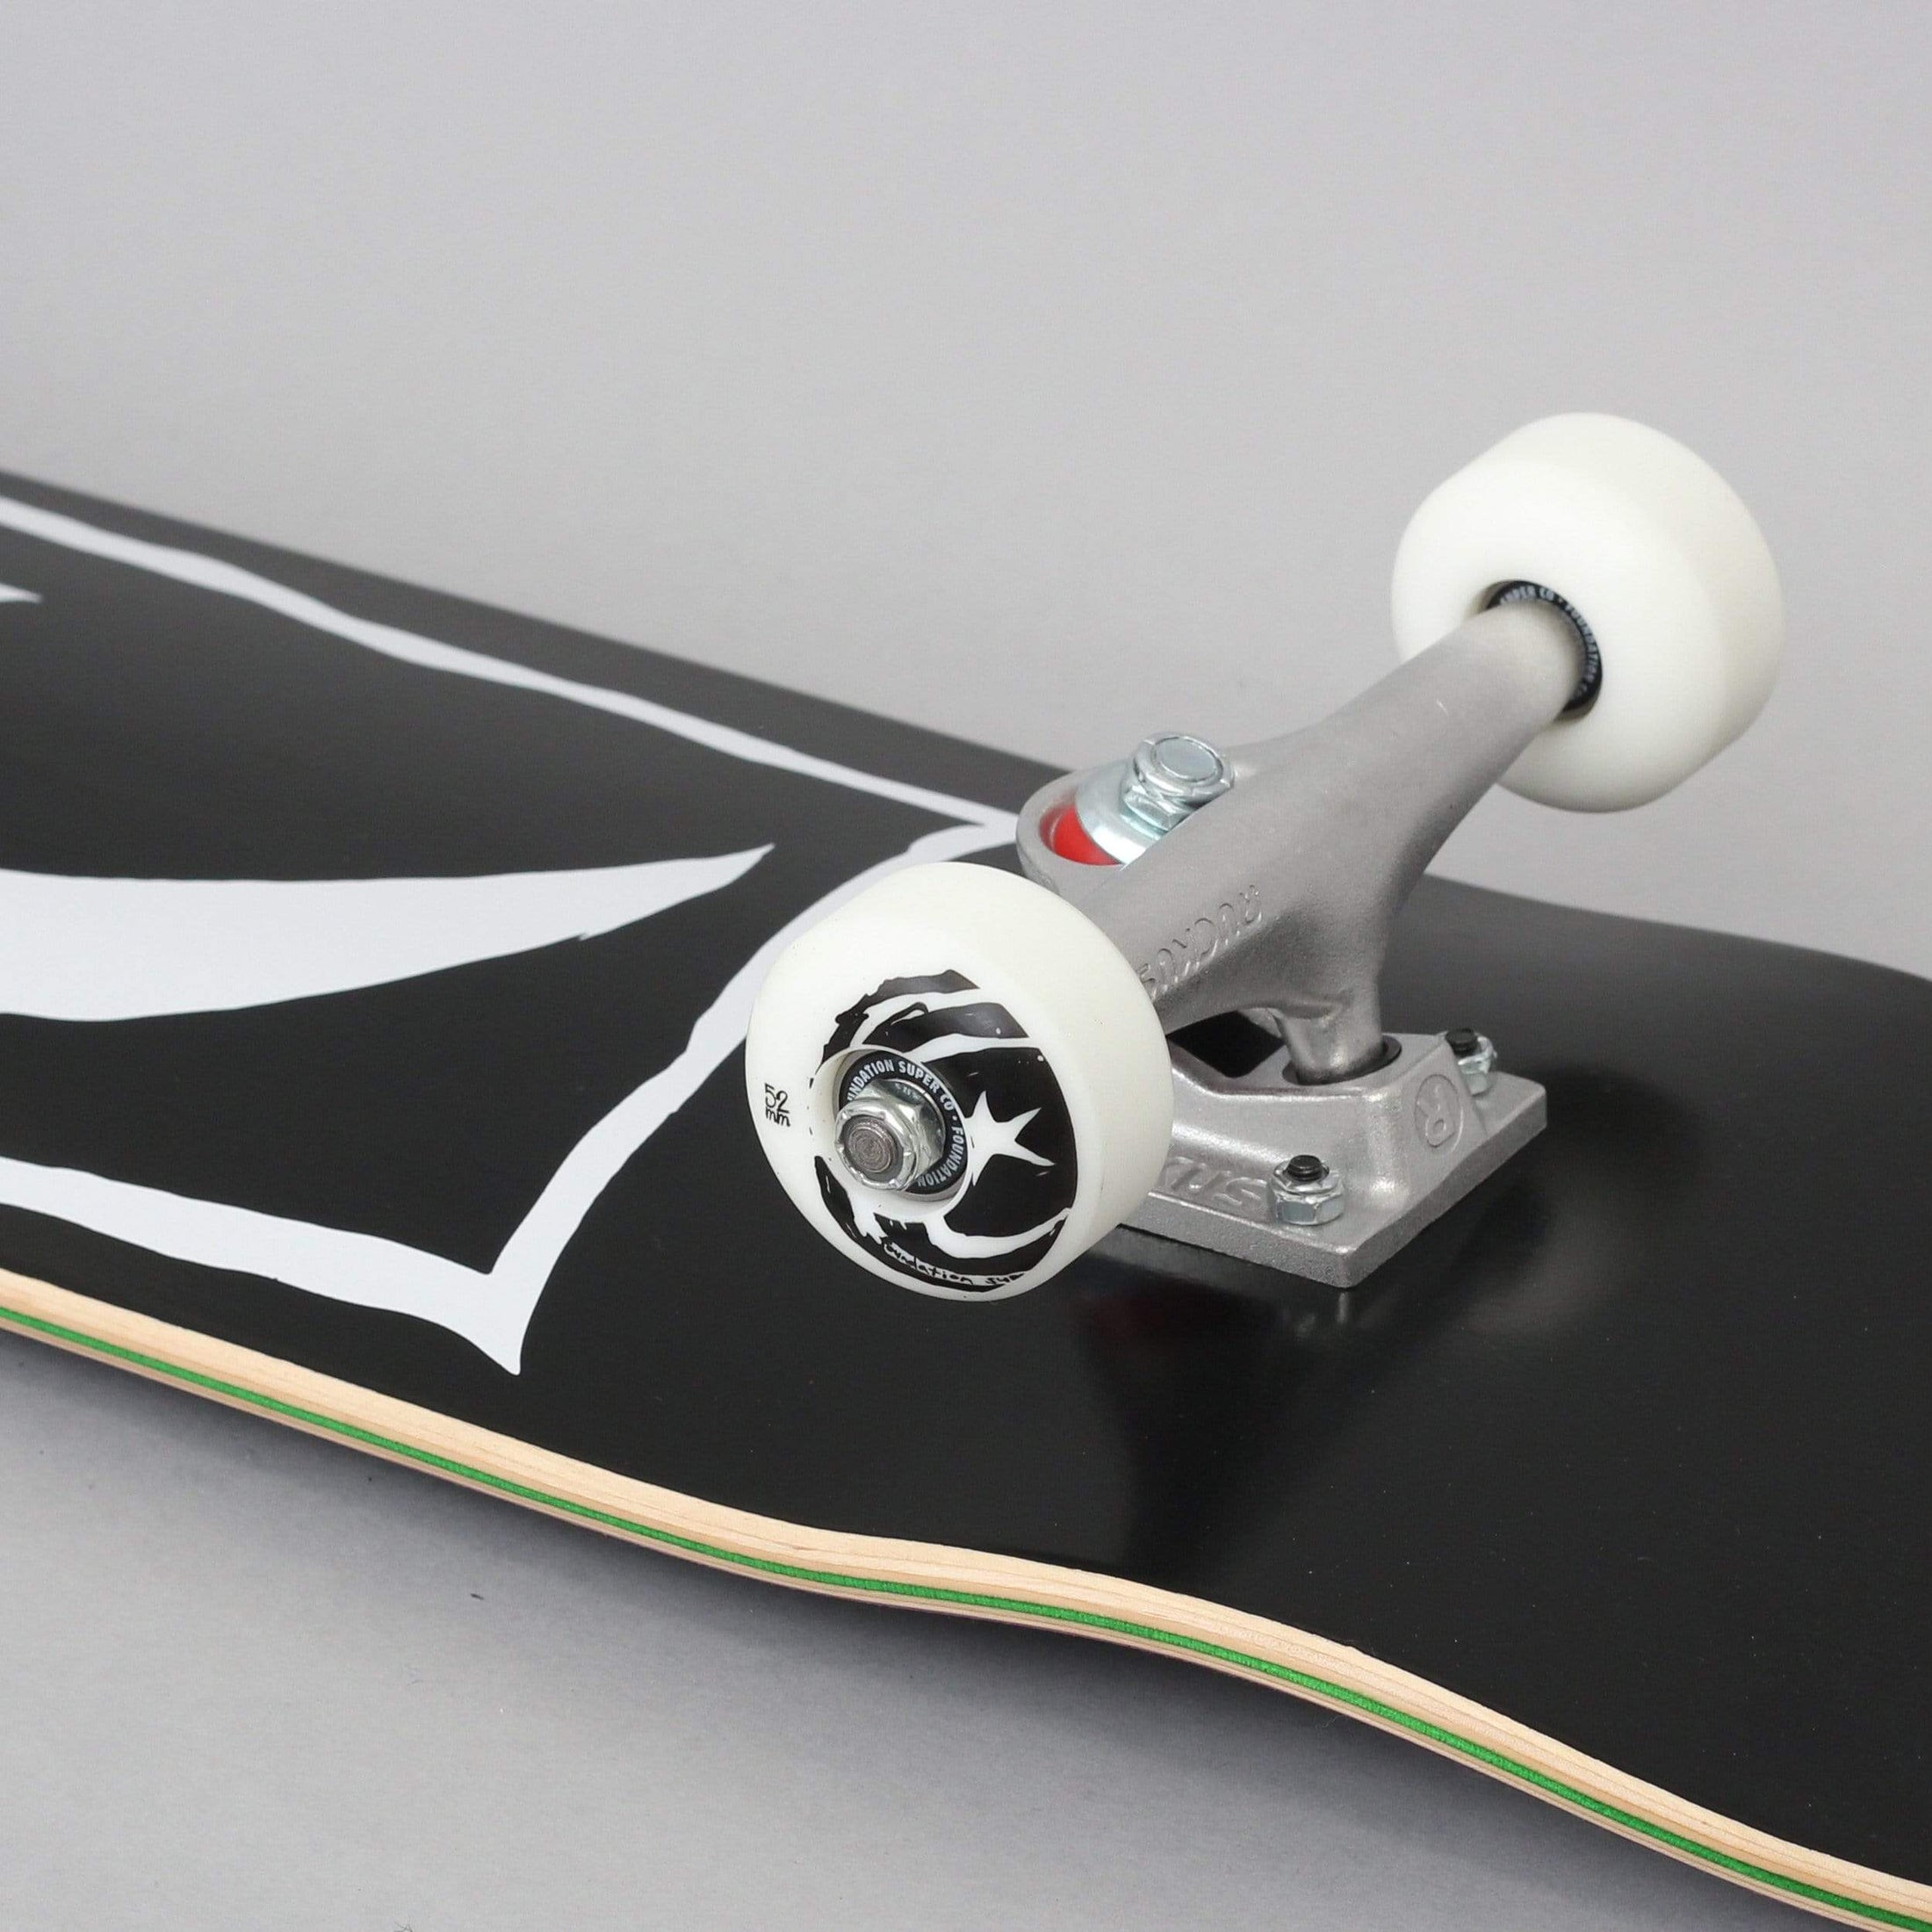 Foundation 8 Star And Moon Square Complete Skateboard Black